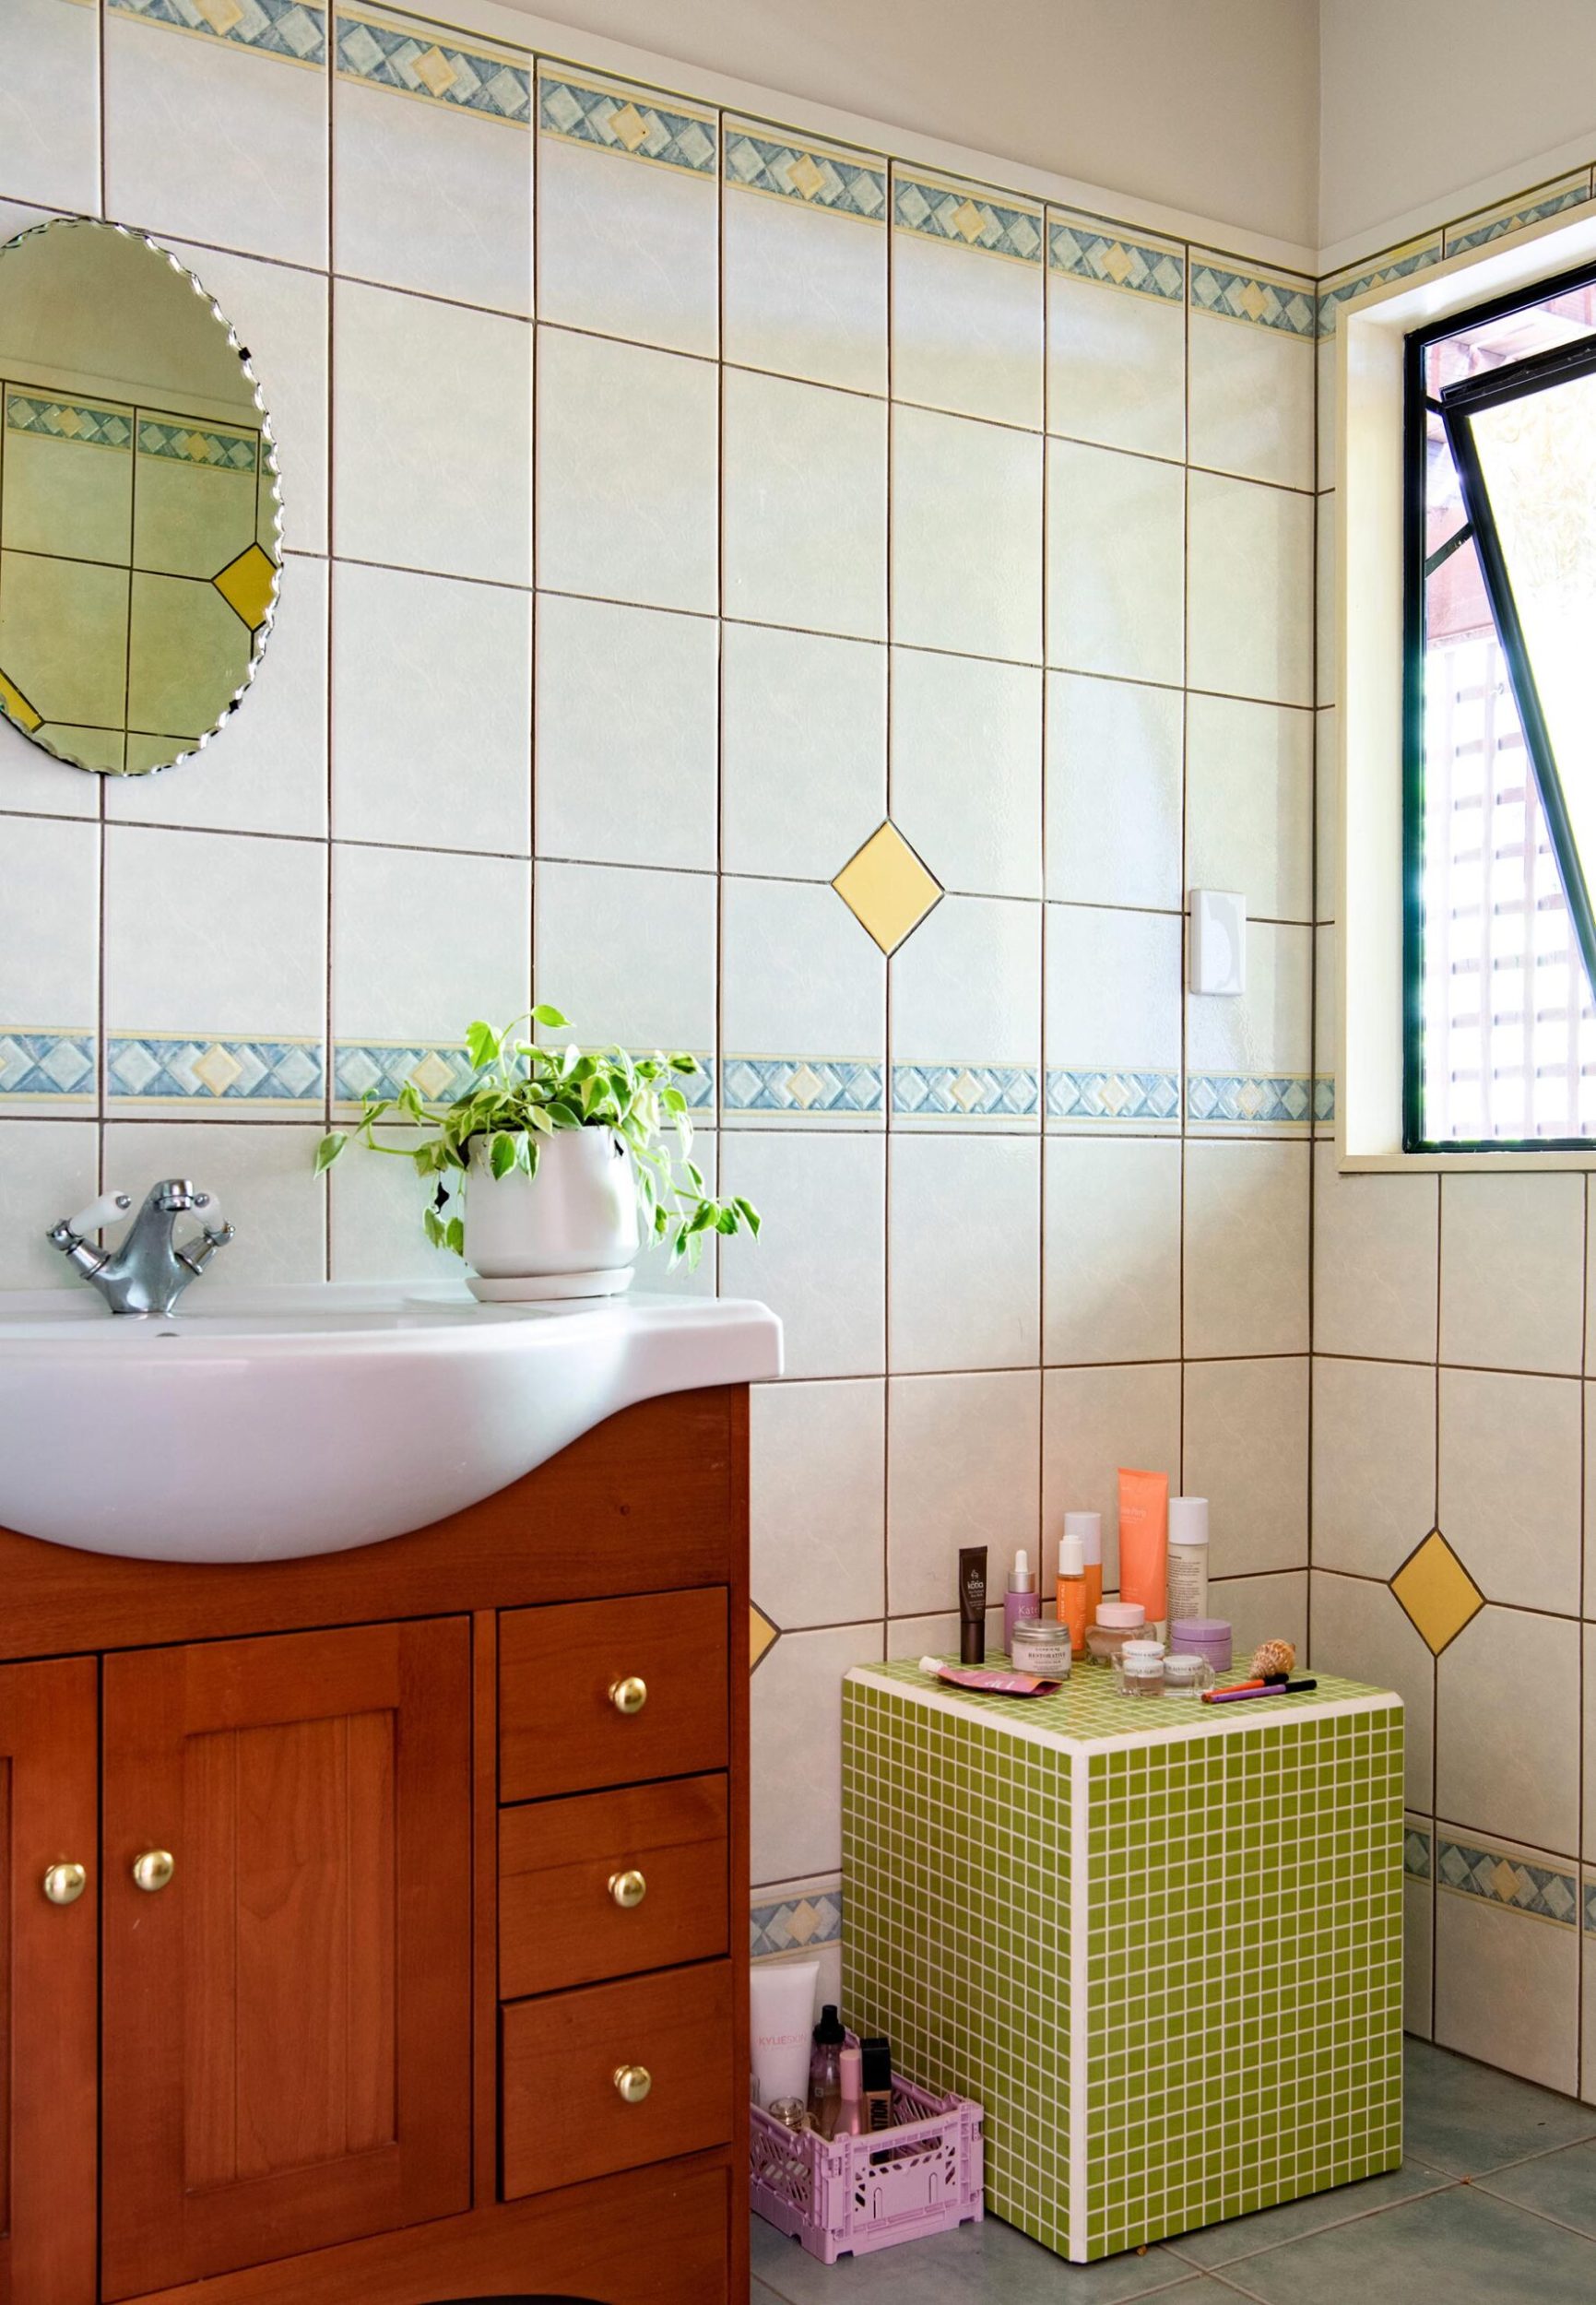 A bathroom with a wood sink cabinet, retro files and a vintage round mirror